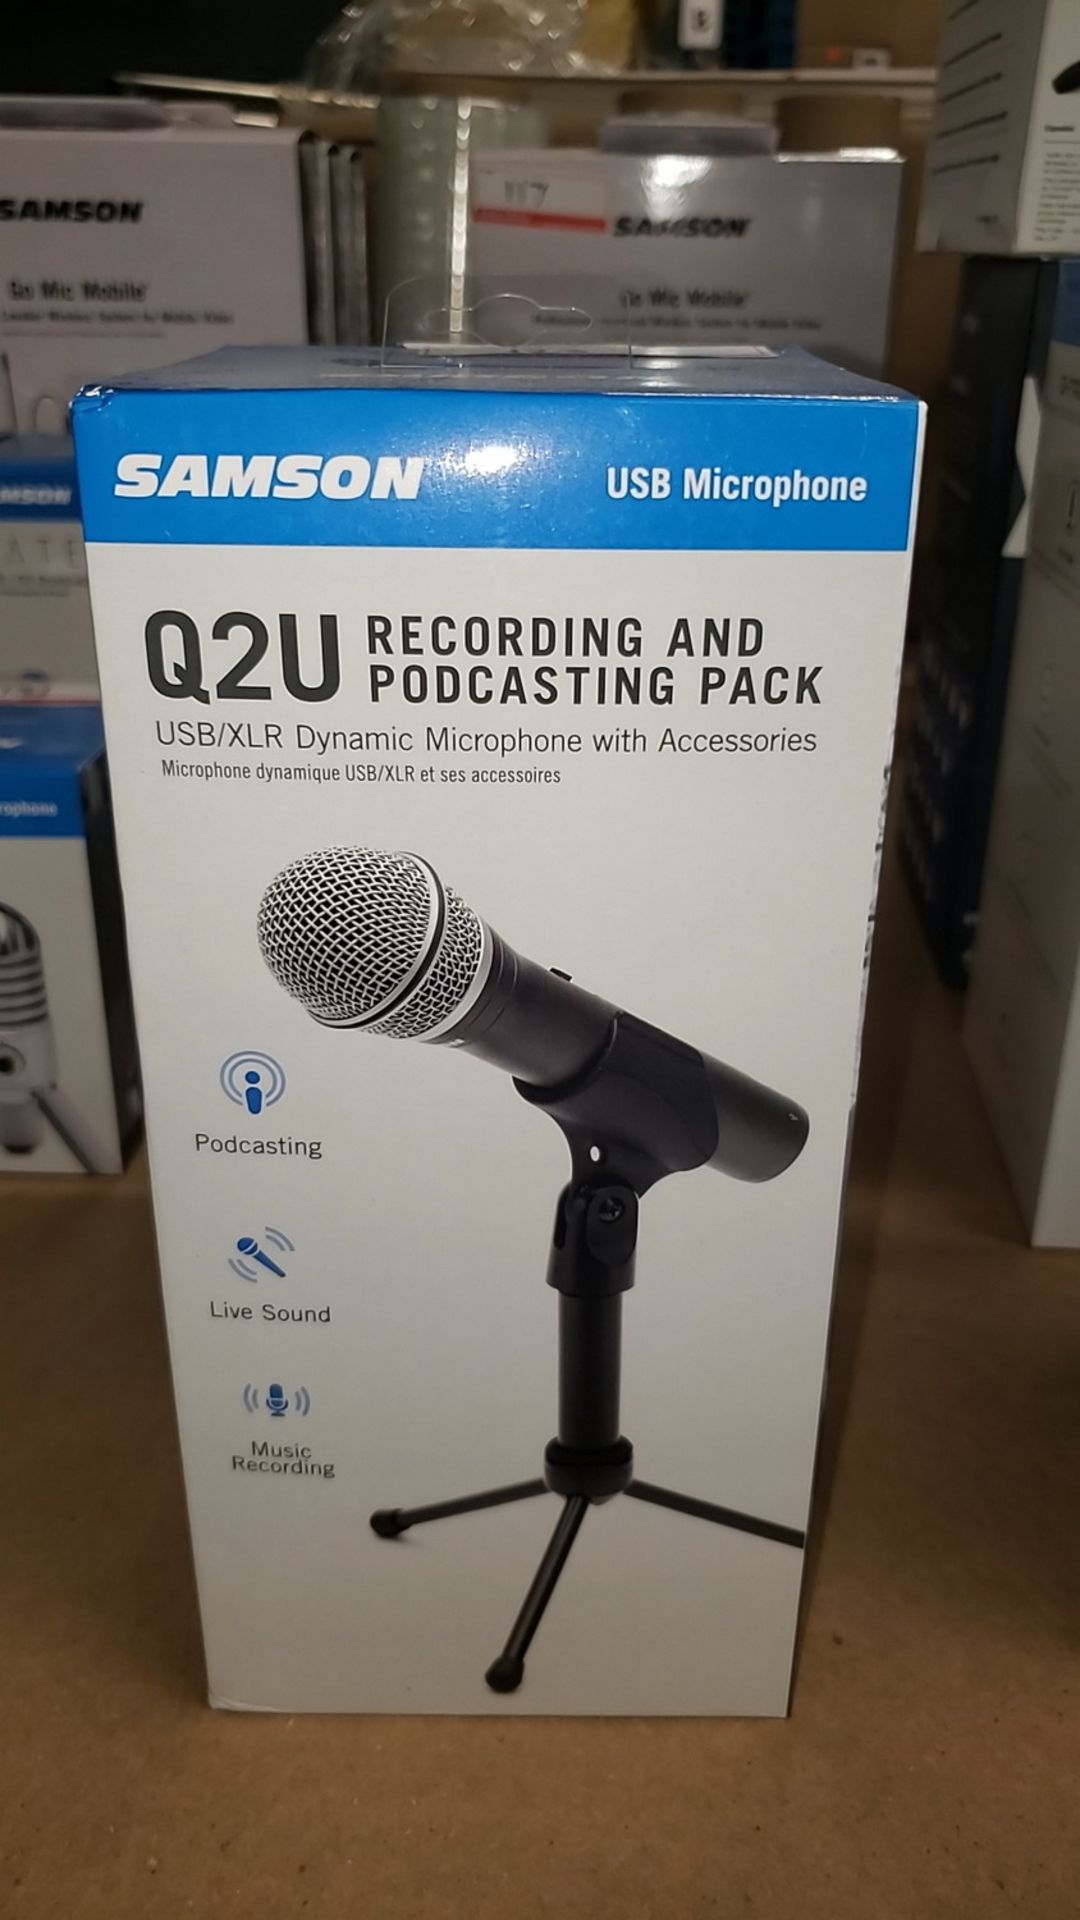 SAMSON Q2U RECORDING AND PODCASTING MIC PACK W/ ACCESSORIES